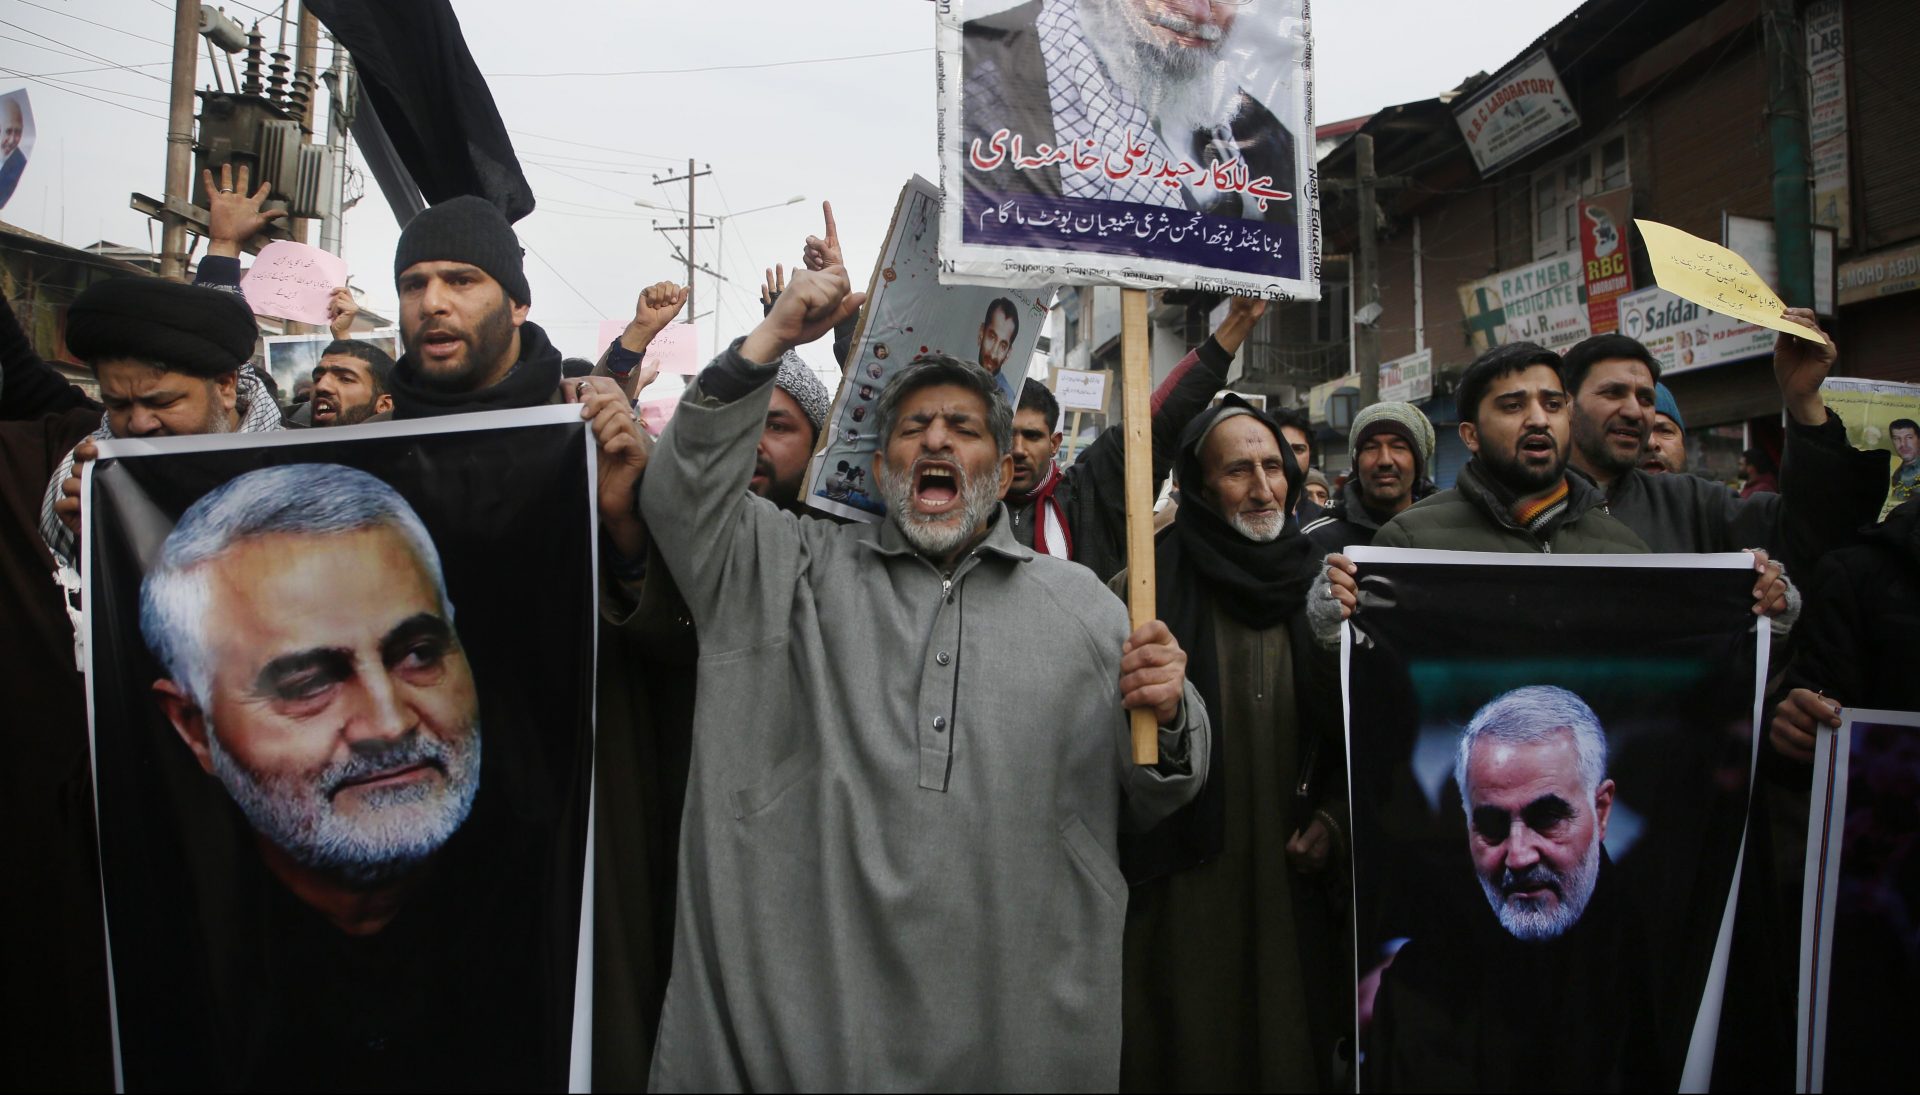 Kashmiri Shiite Muslims shout anti American and anti Israel slogans during a protest against U.S. airstrike in Iraq that killed Iranian Revolutionary Guard Gen. Qassem Soleimani, seen in the photographs, at Magam 37 kilometers (23 miles) north of Srinagar, Indian controlled Kashmir, Friday, Jan. 3, 2020. The killing of Iran's top military commander Gen. Qassem Soleimani triggered several anti-U.S. protests in Indian-controlled Kashmir, the protesters also shut down shops and businesses in Magam and Budgam towns in south Kashmir.